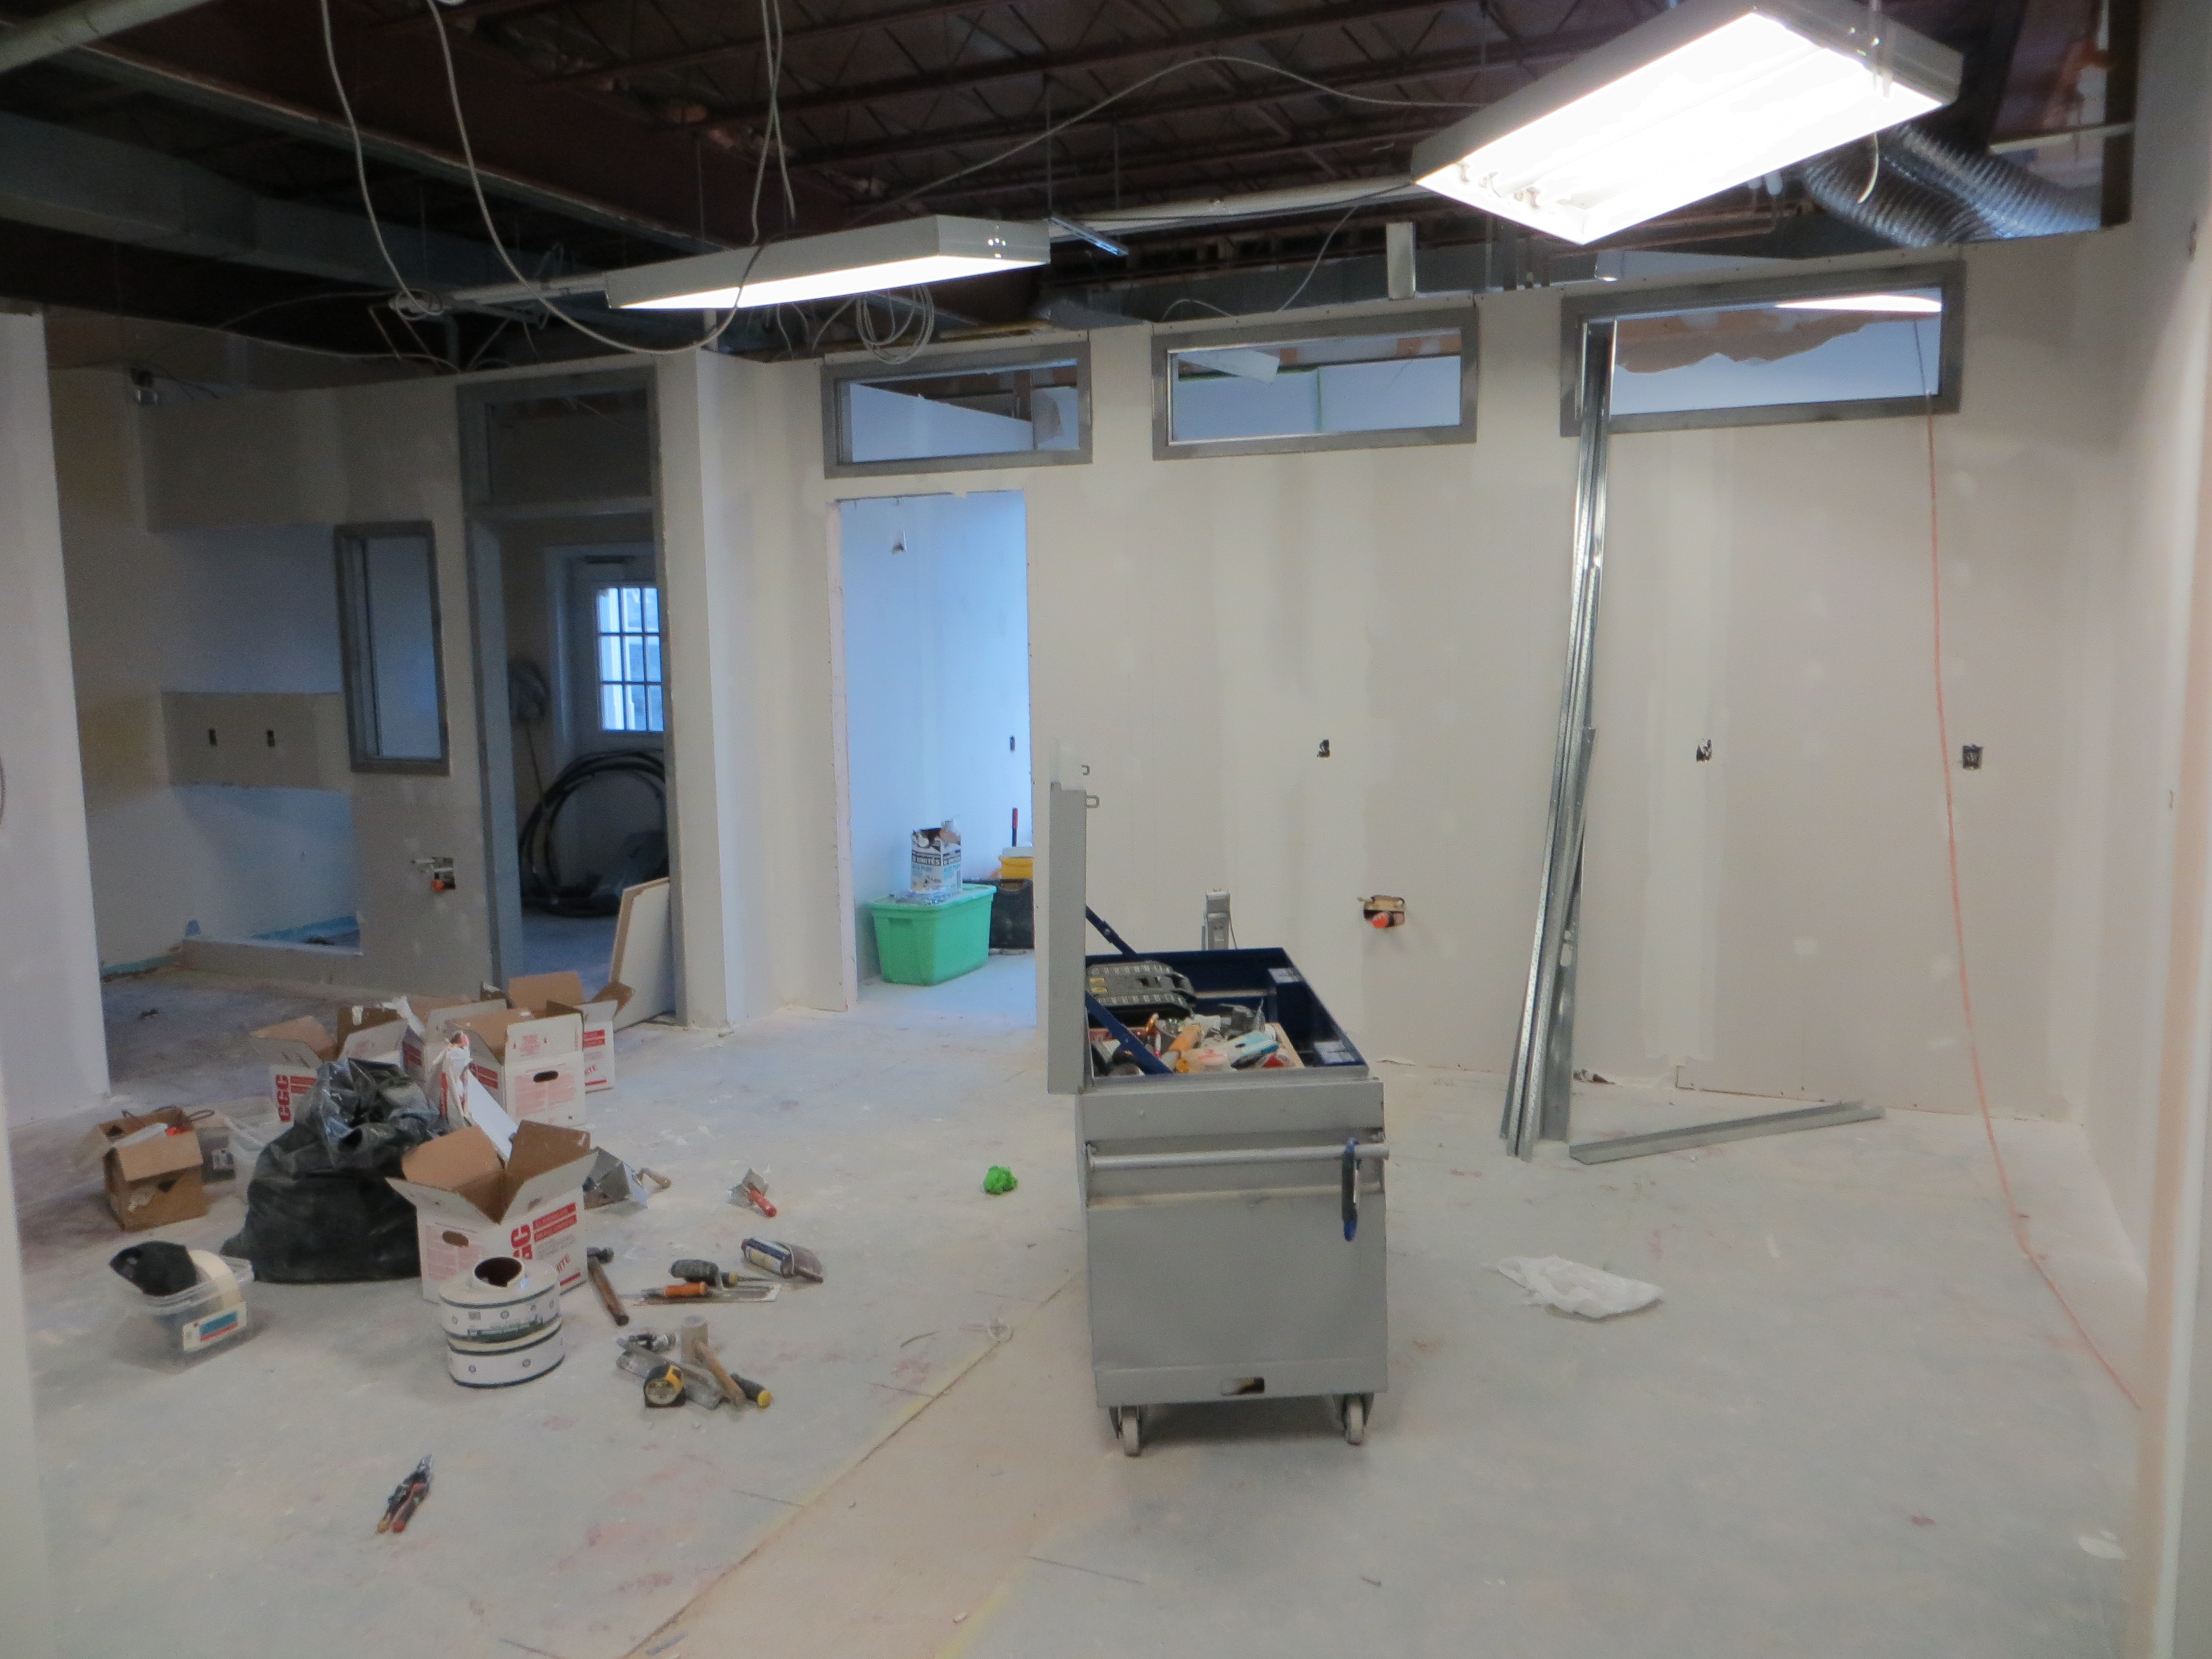 Here are recent pictures of the reception and the treatment room